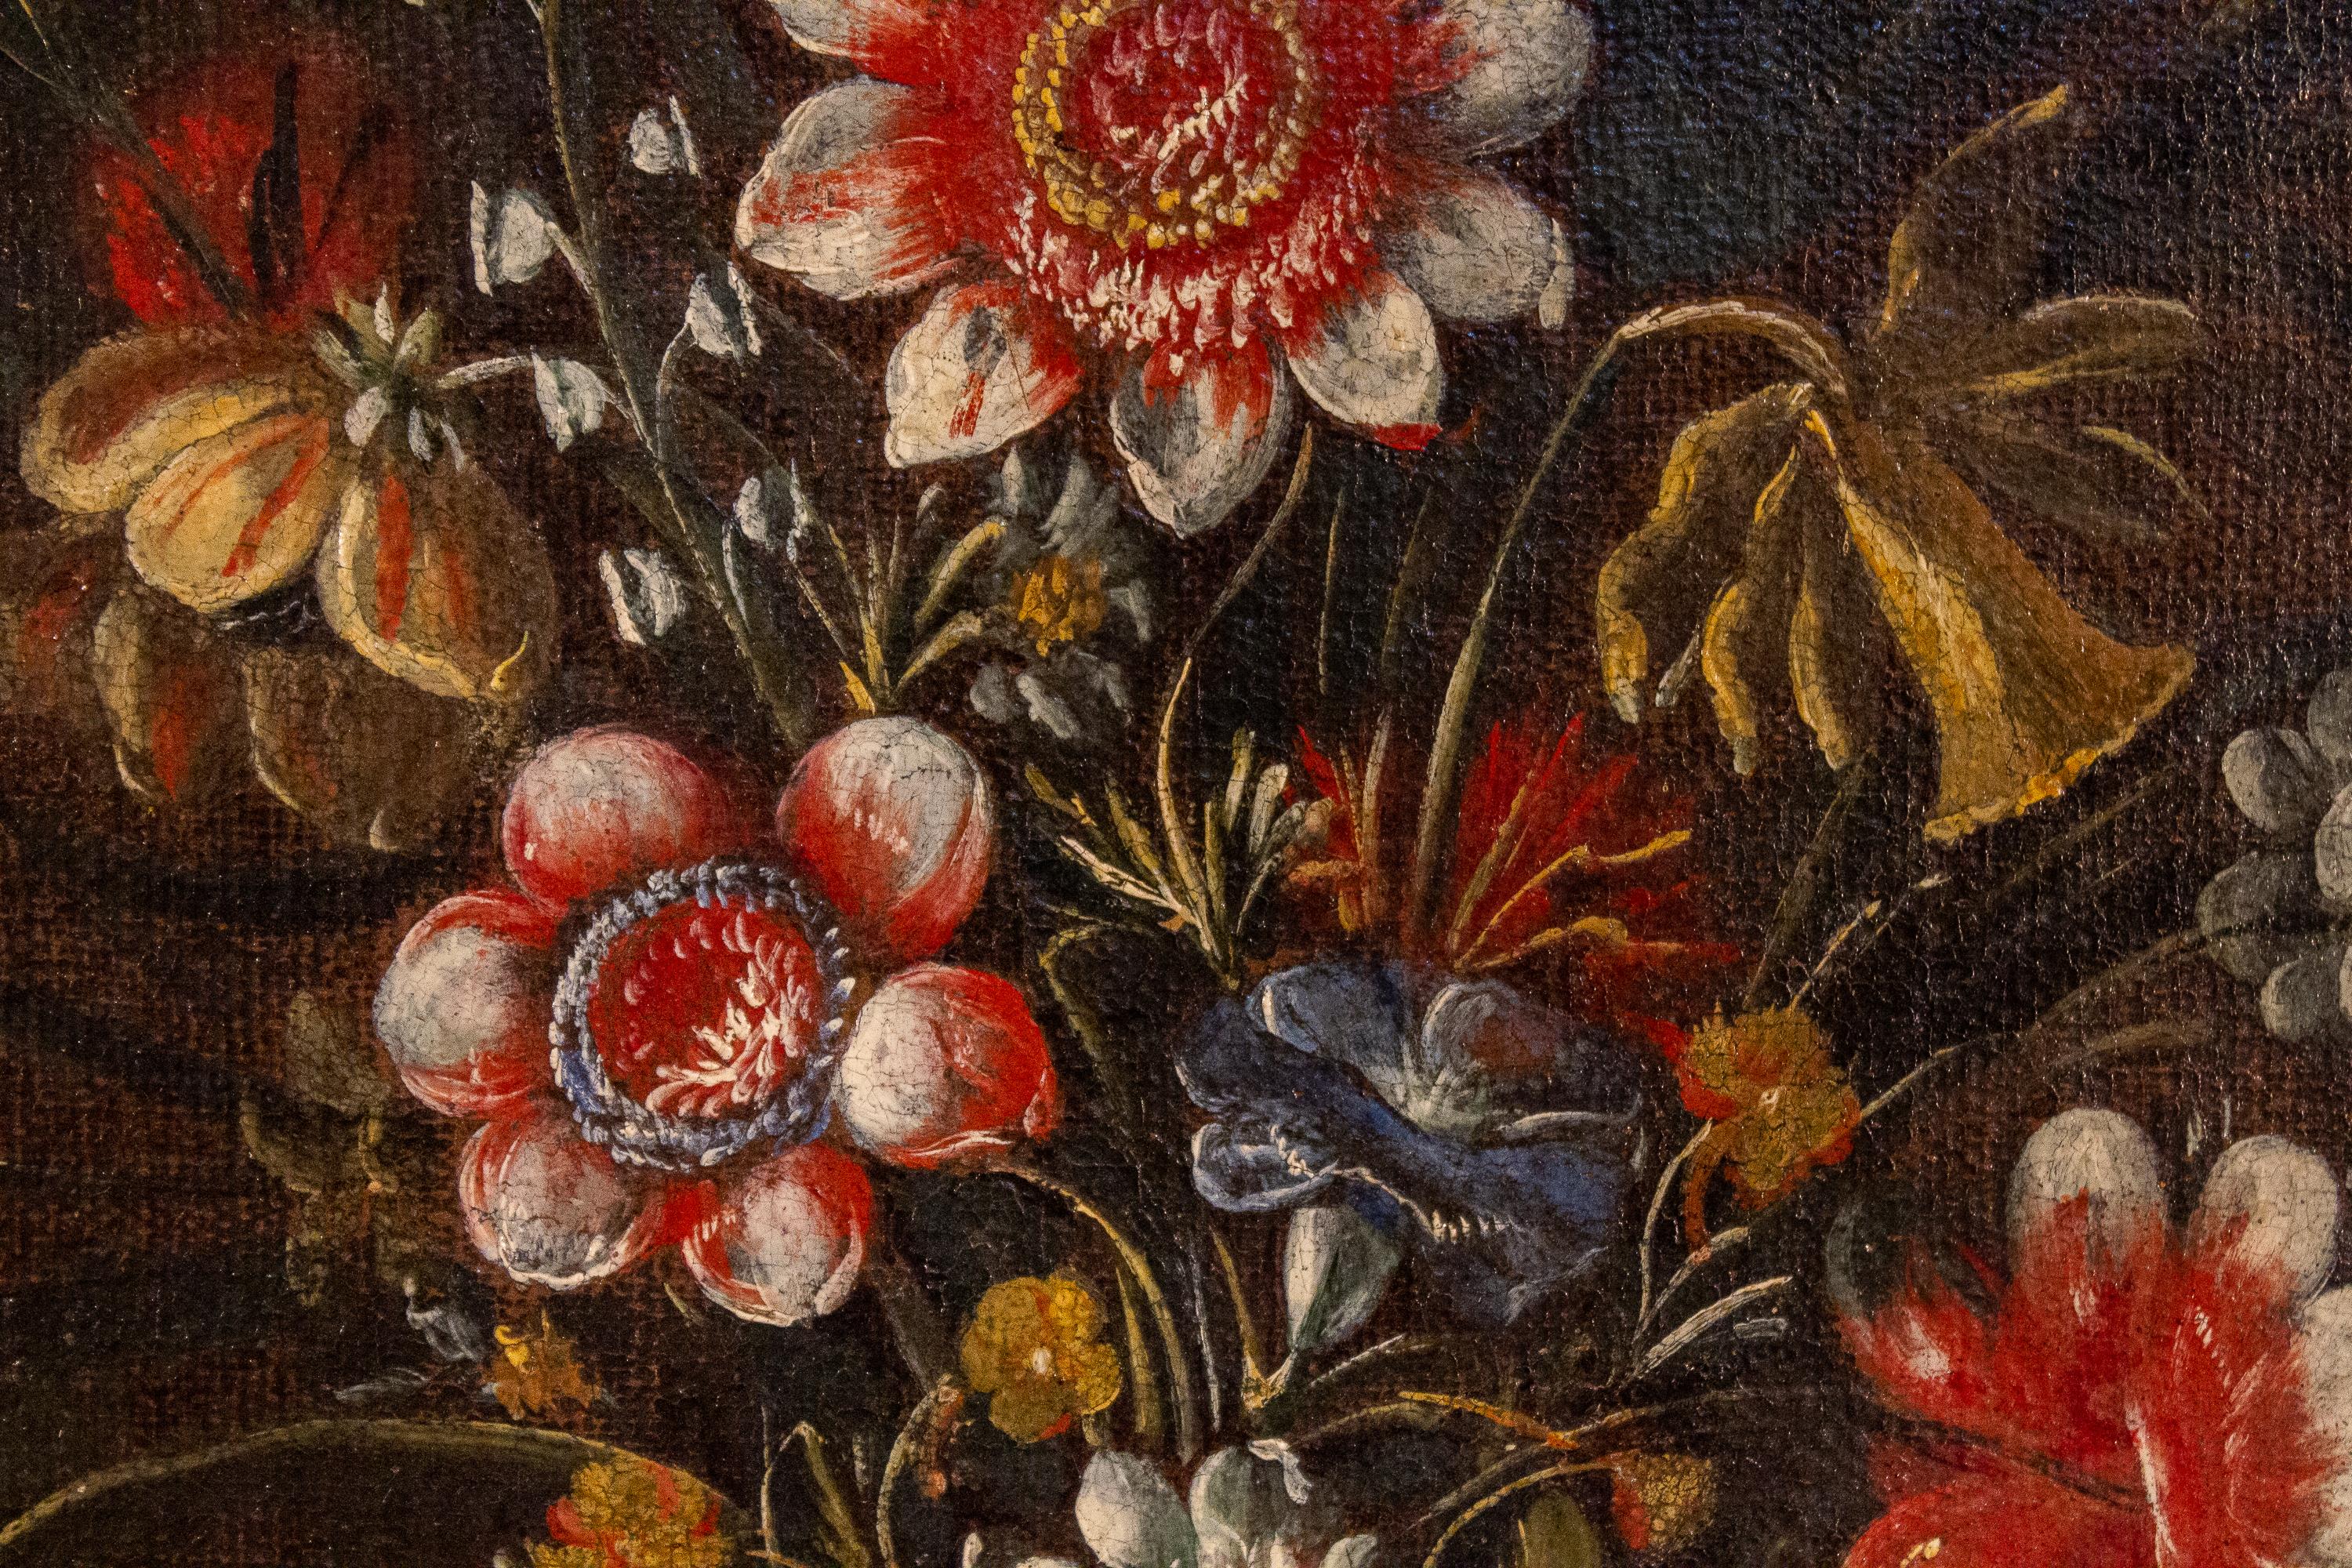 Pair of 18th century Italian Still Life Paintings of Flowers   For Sale 8